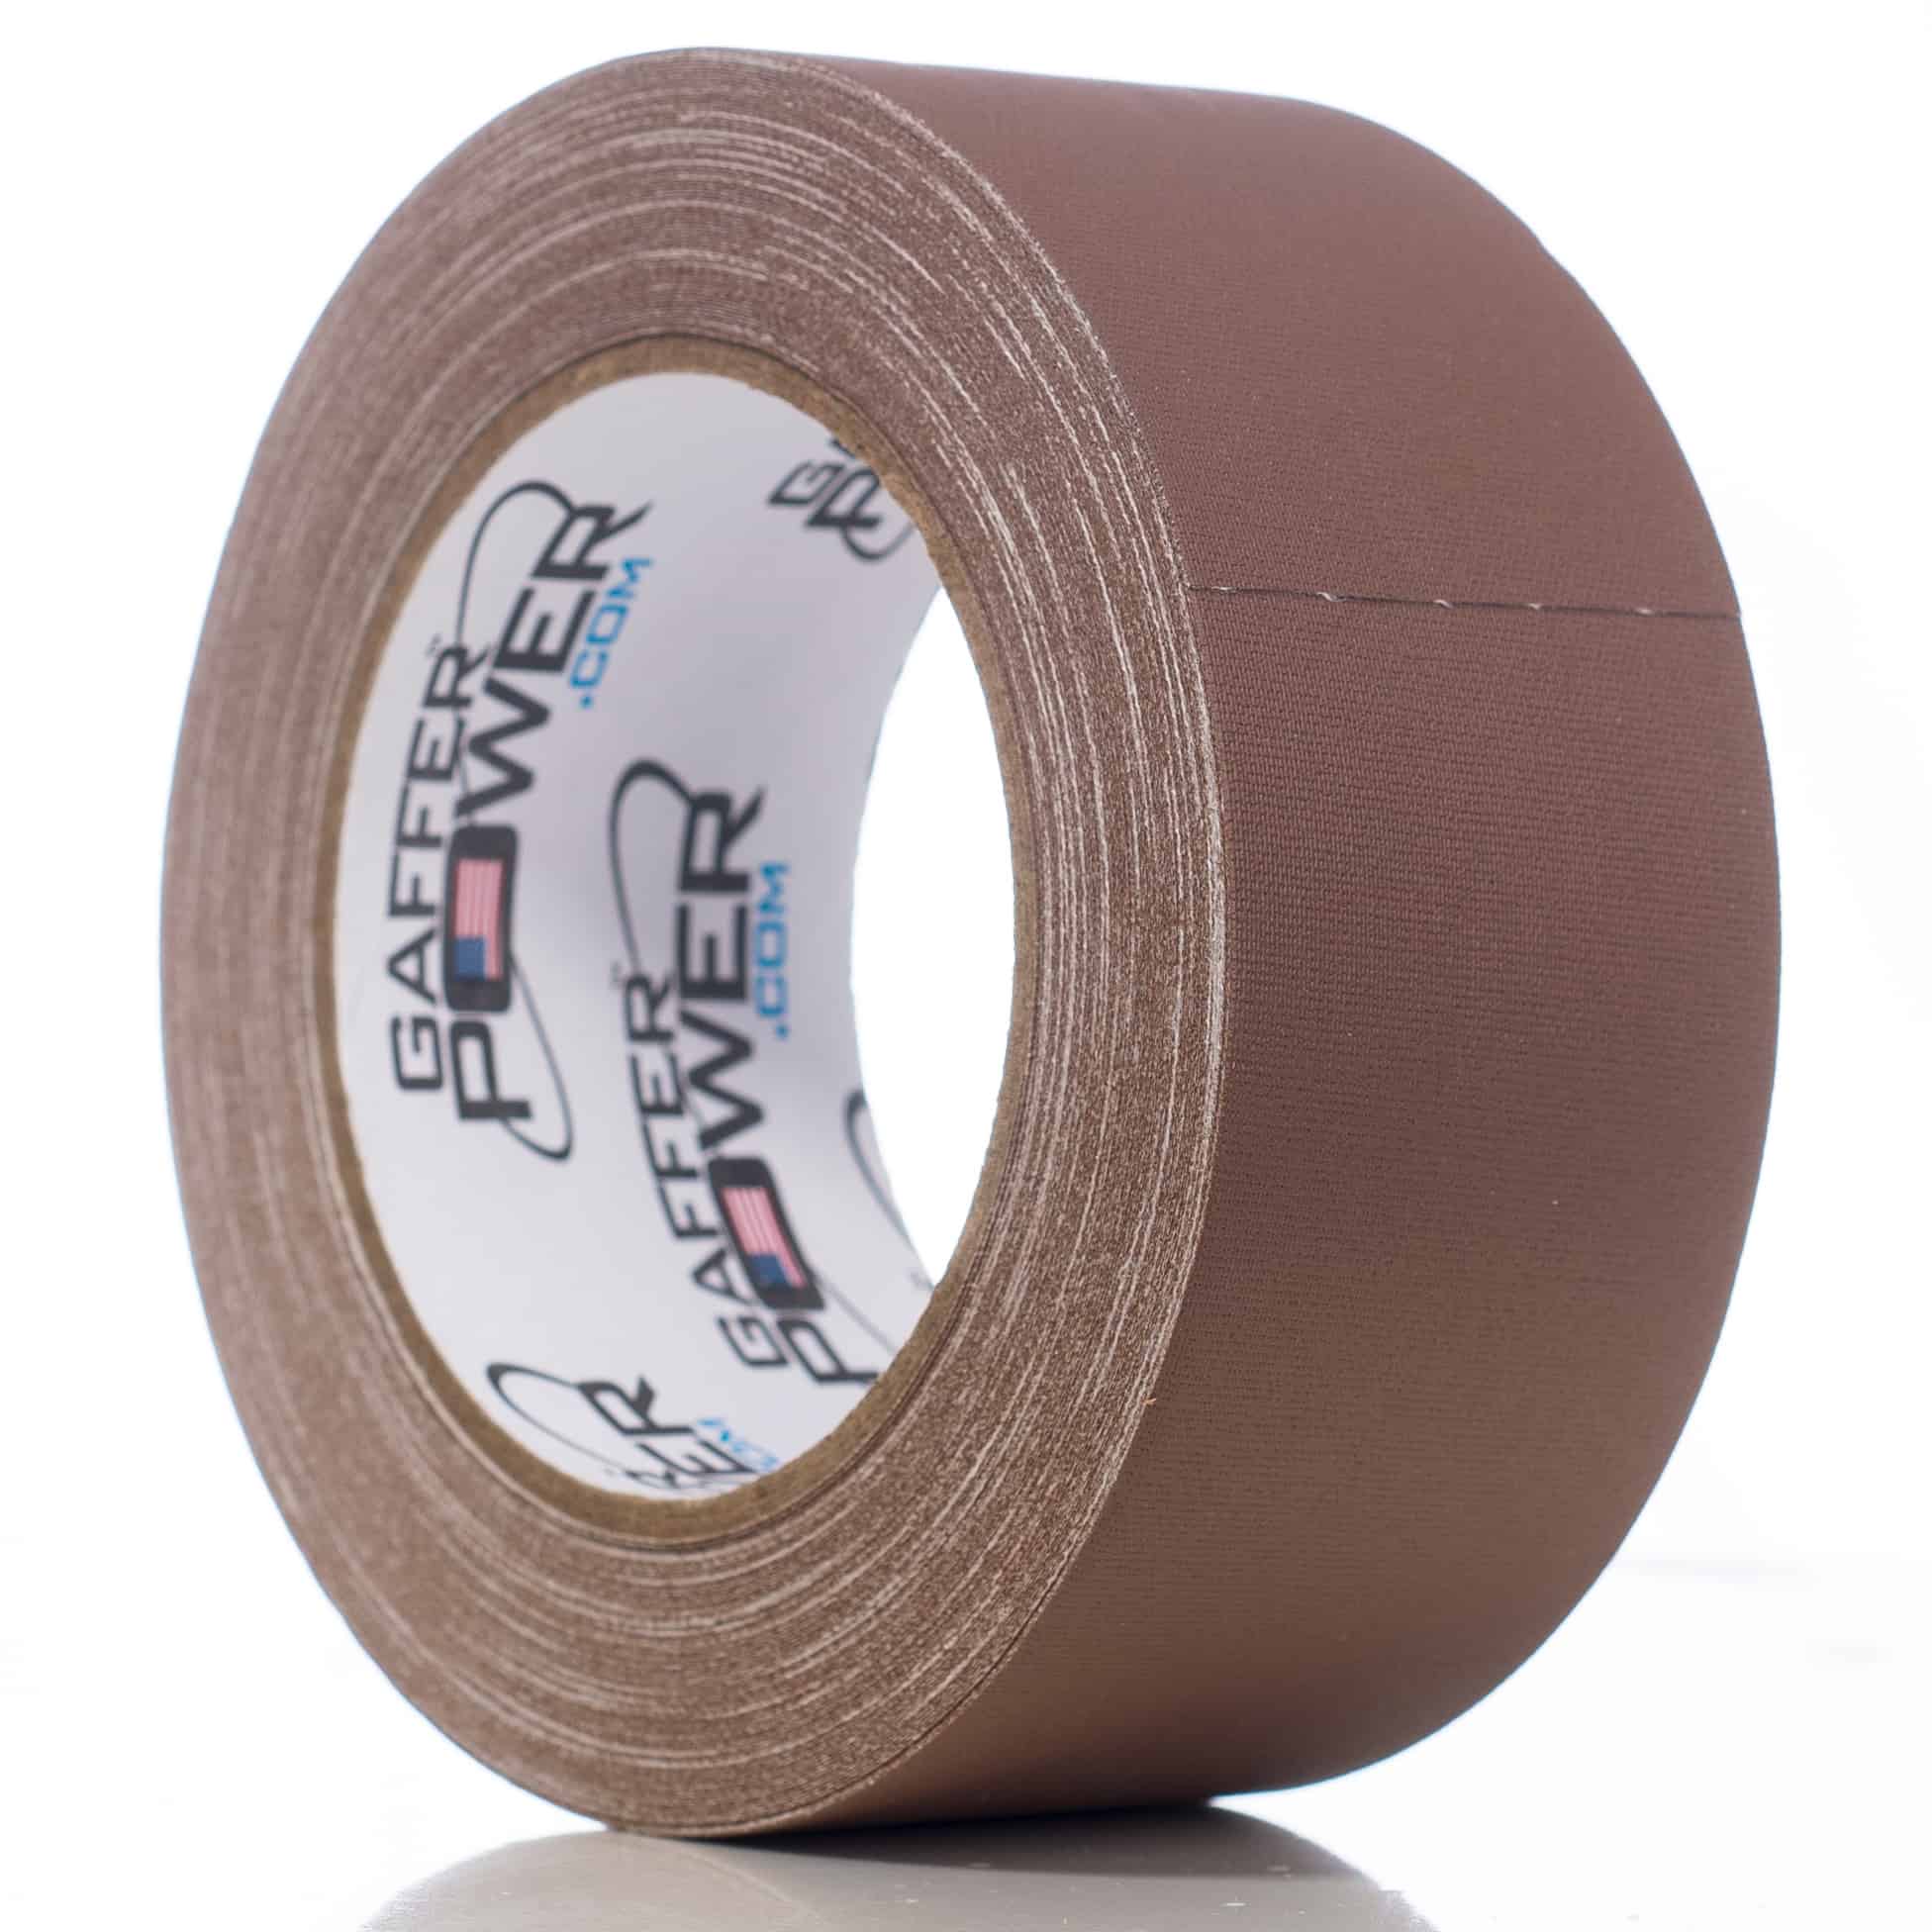 Real Premium Grade Gaffer Tape by Power Made in The USA Brown 2 inch x 30 yds Heavy Duty Gaffers Multipurpose Better Than Duct